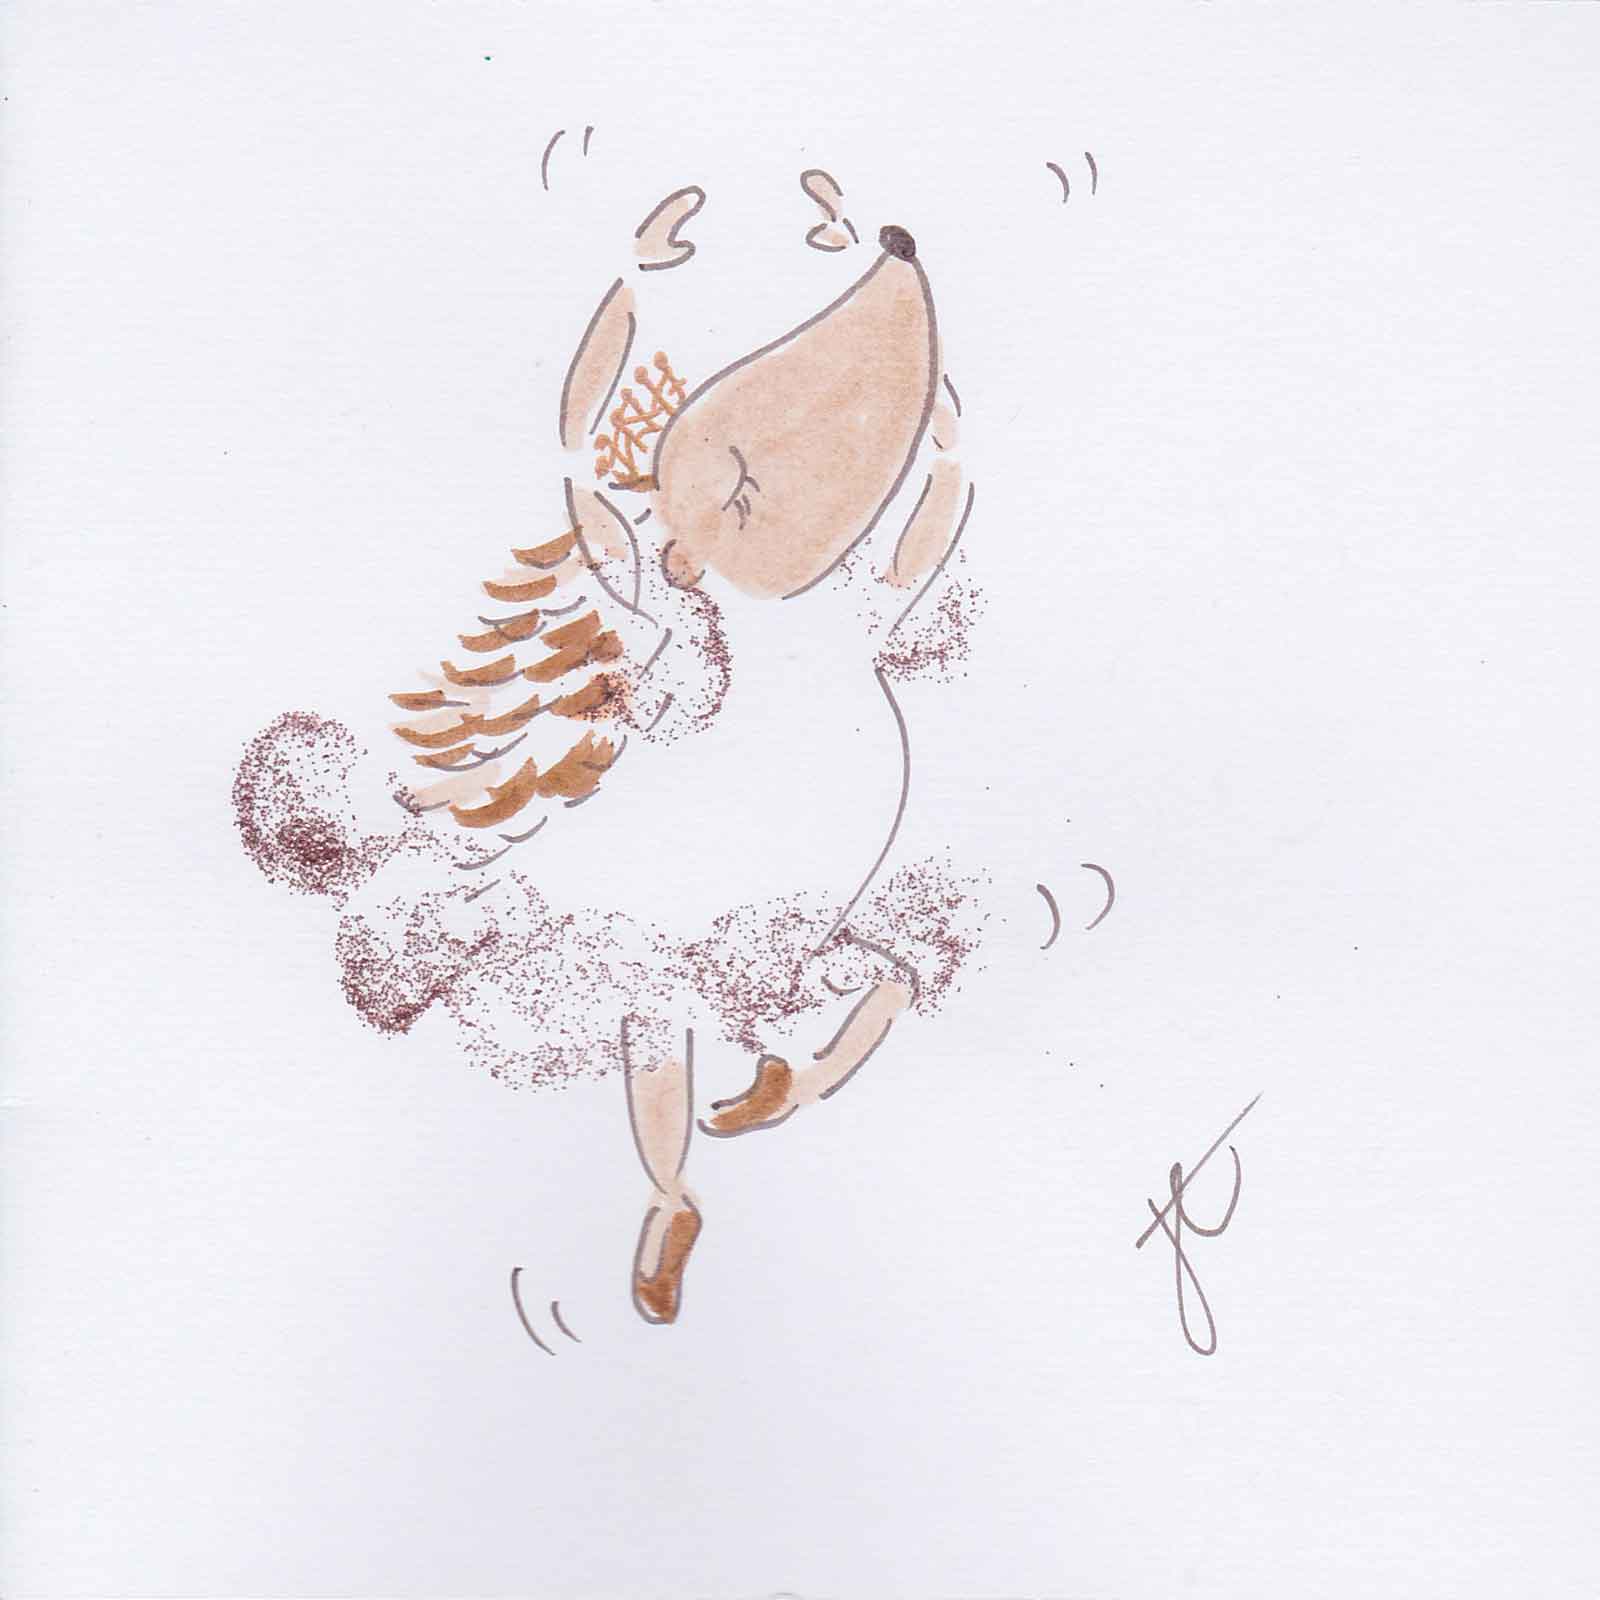 Ballettoons Hedgie in pirouette with pink glitter tutu